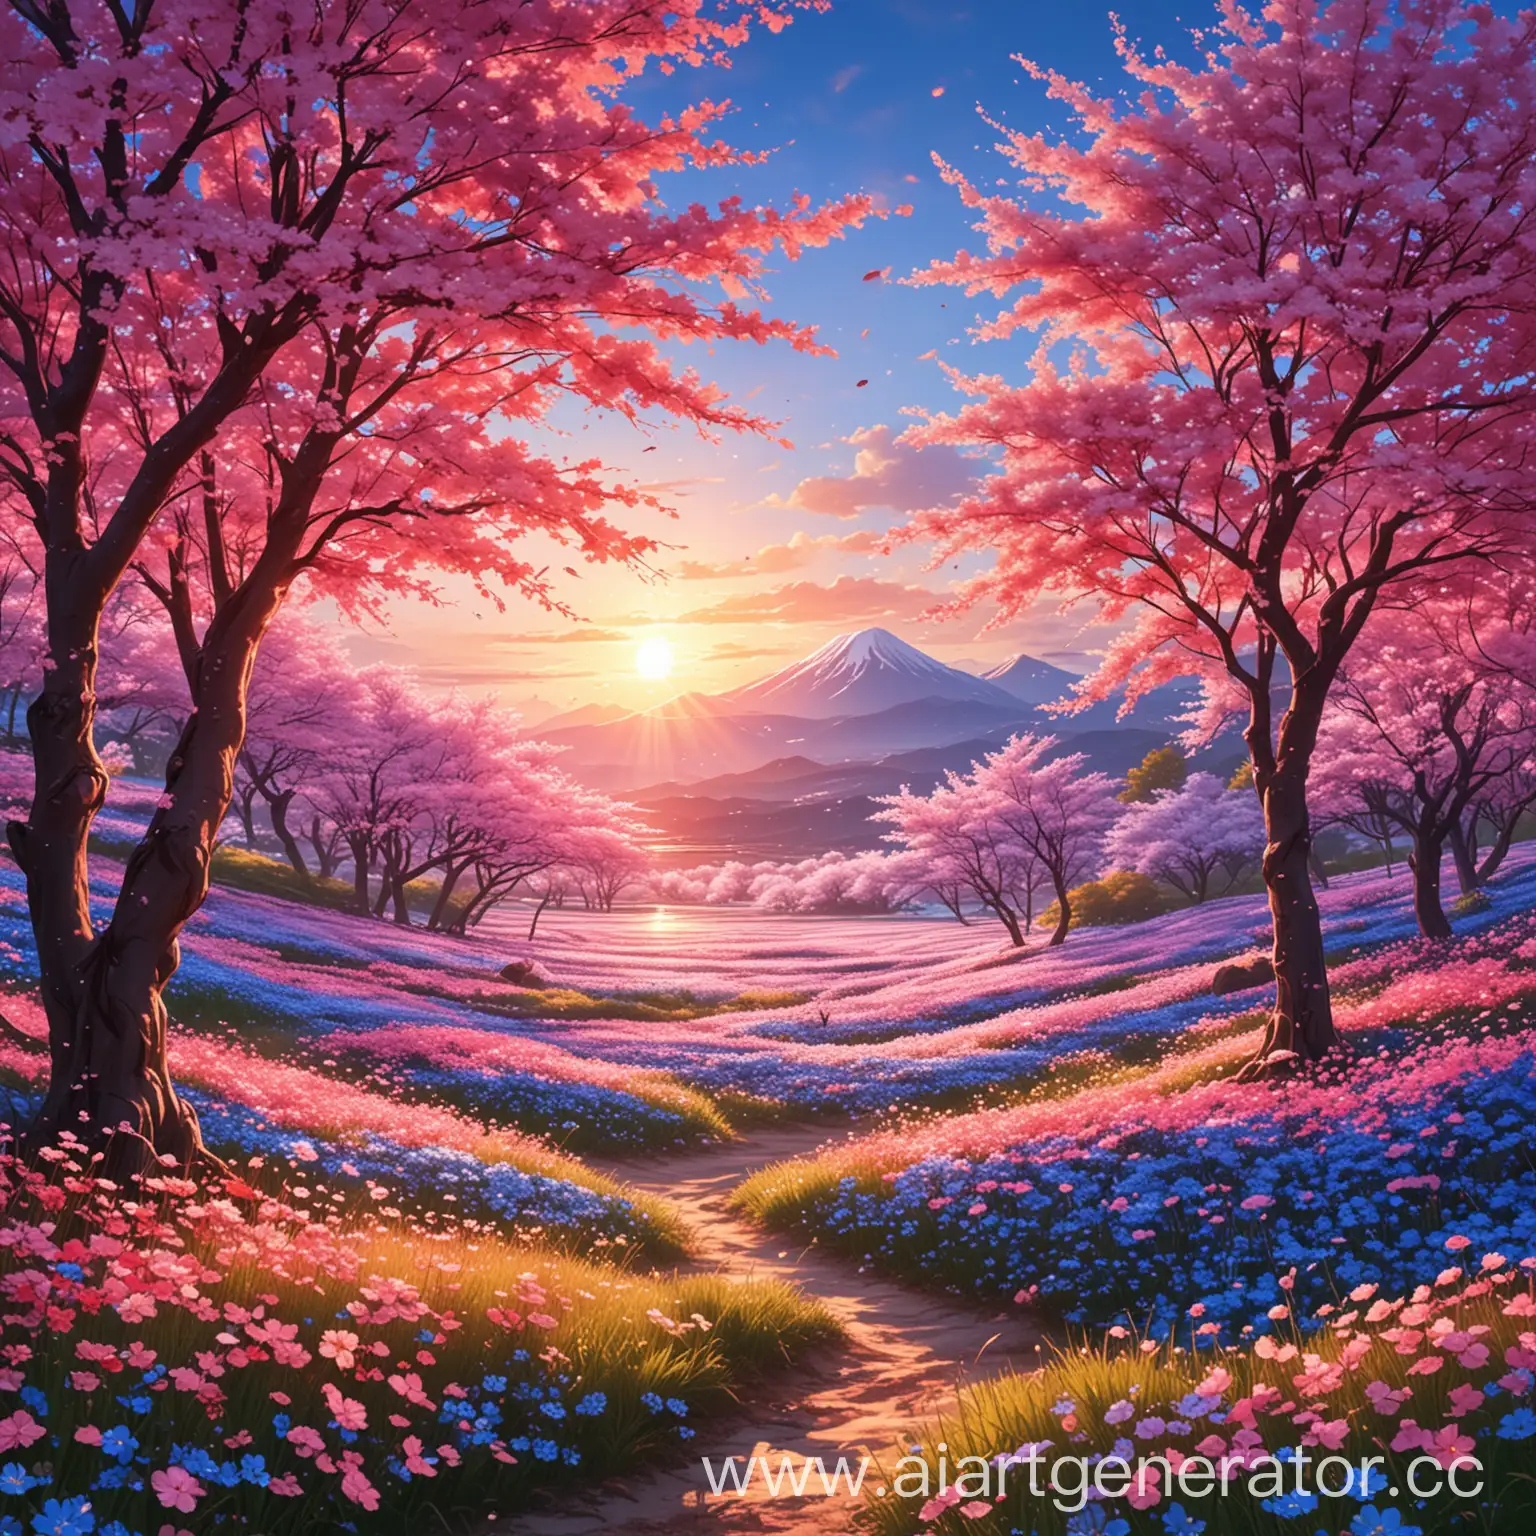 Sakura-Sunset-Anime-Landscape-with-Pink-and-Blue-Flowers